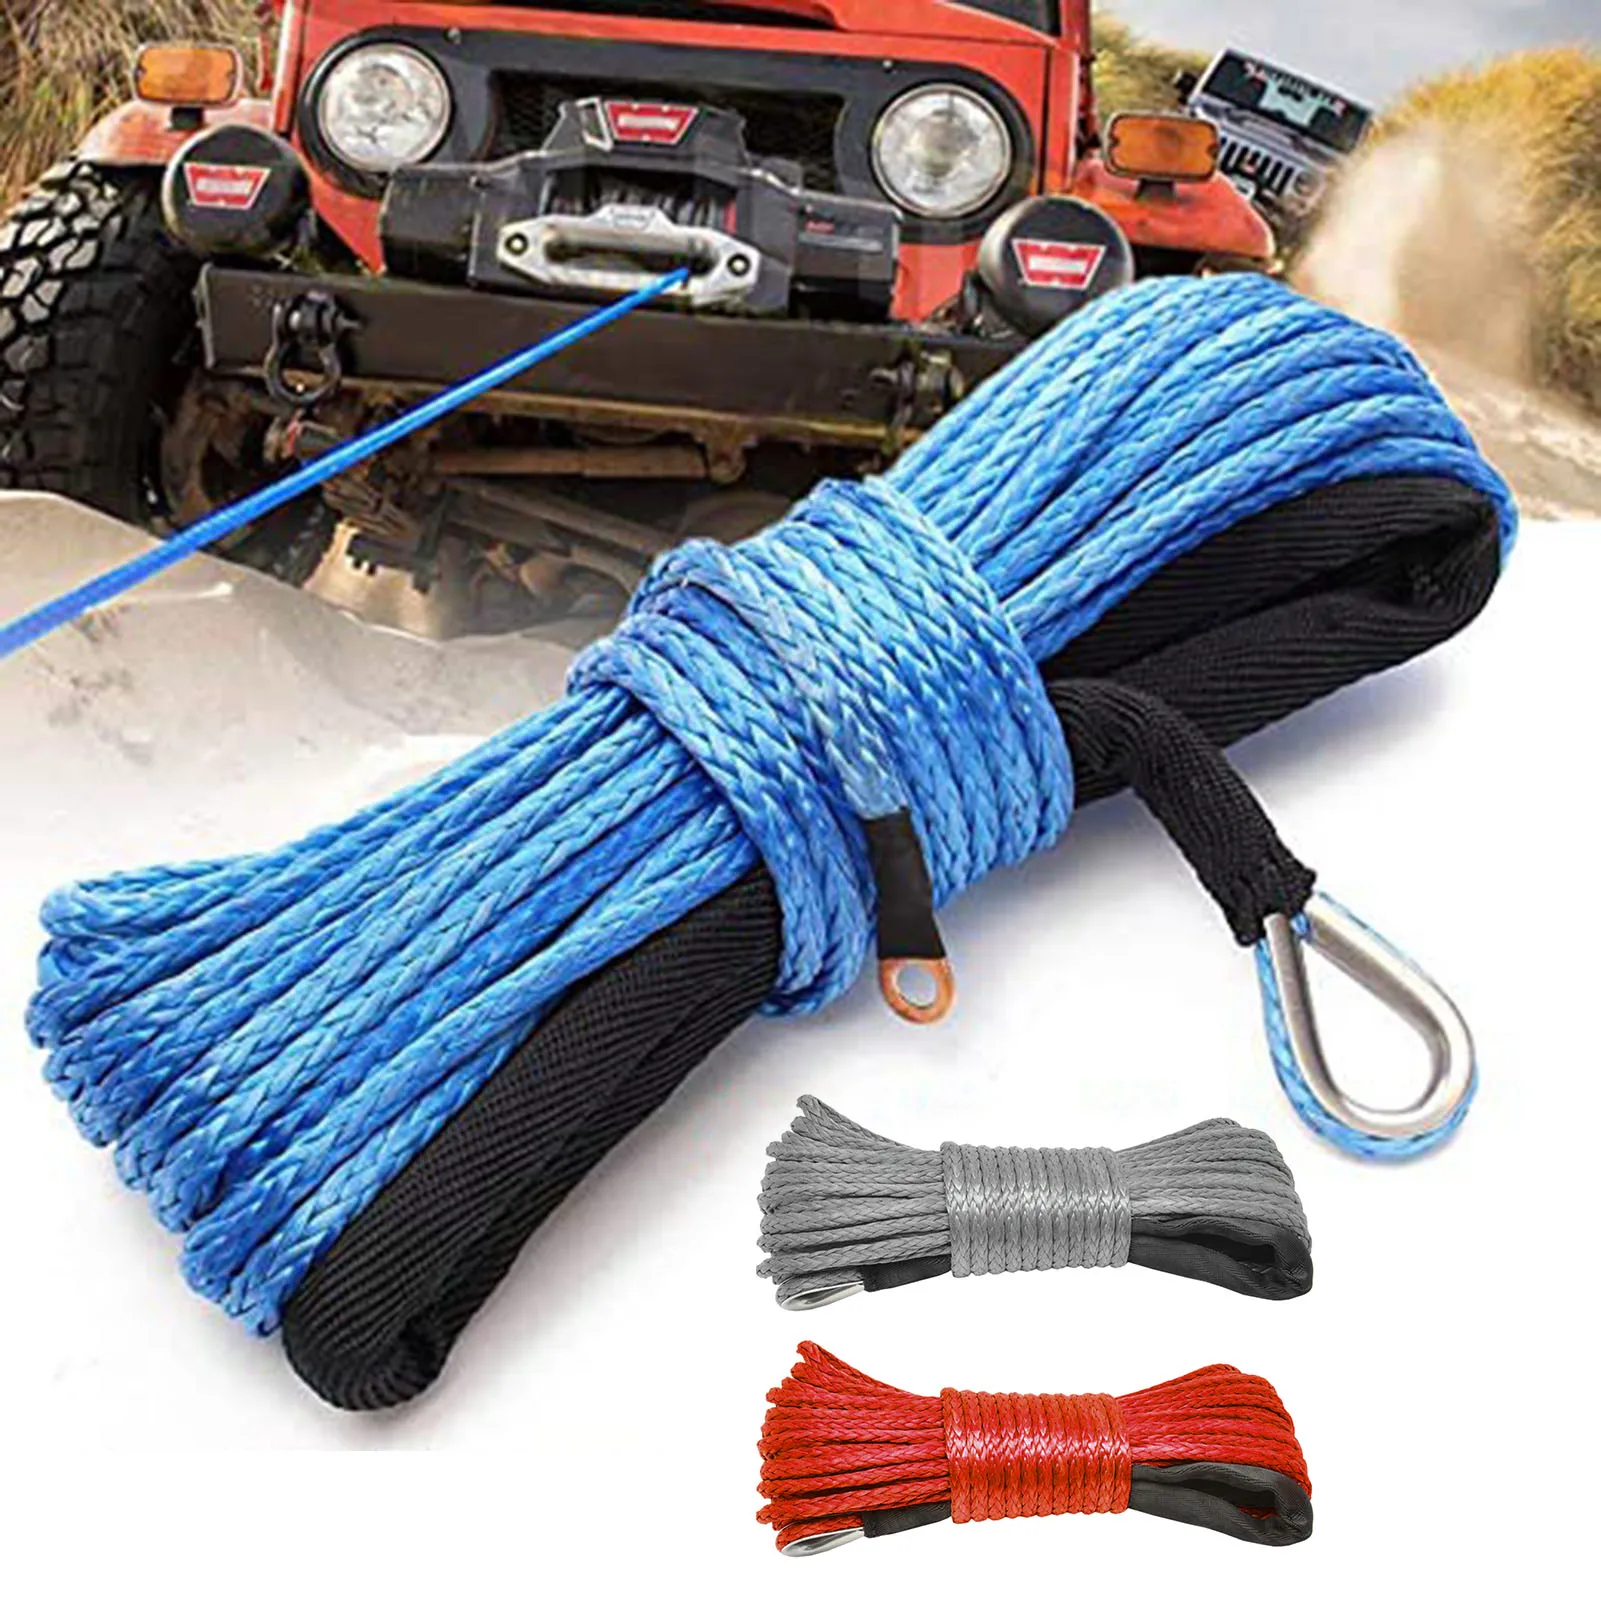 

7700LBs Winch Line Cable Rope Winches Towing Hook Stopper Rubber for ATV SUV UTV Truck Offroad Accessories